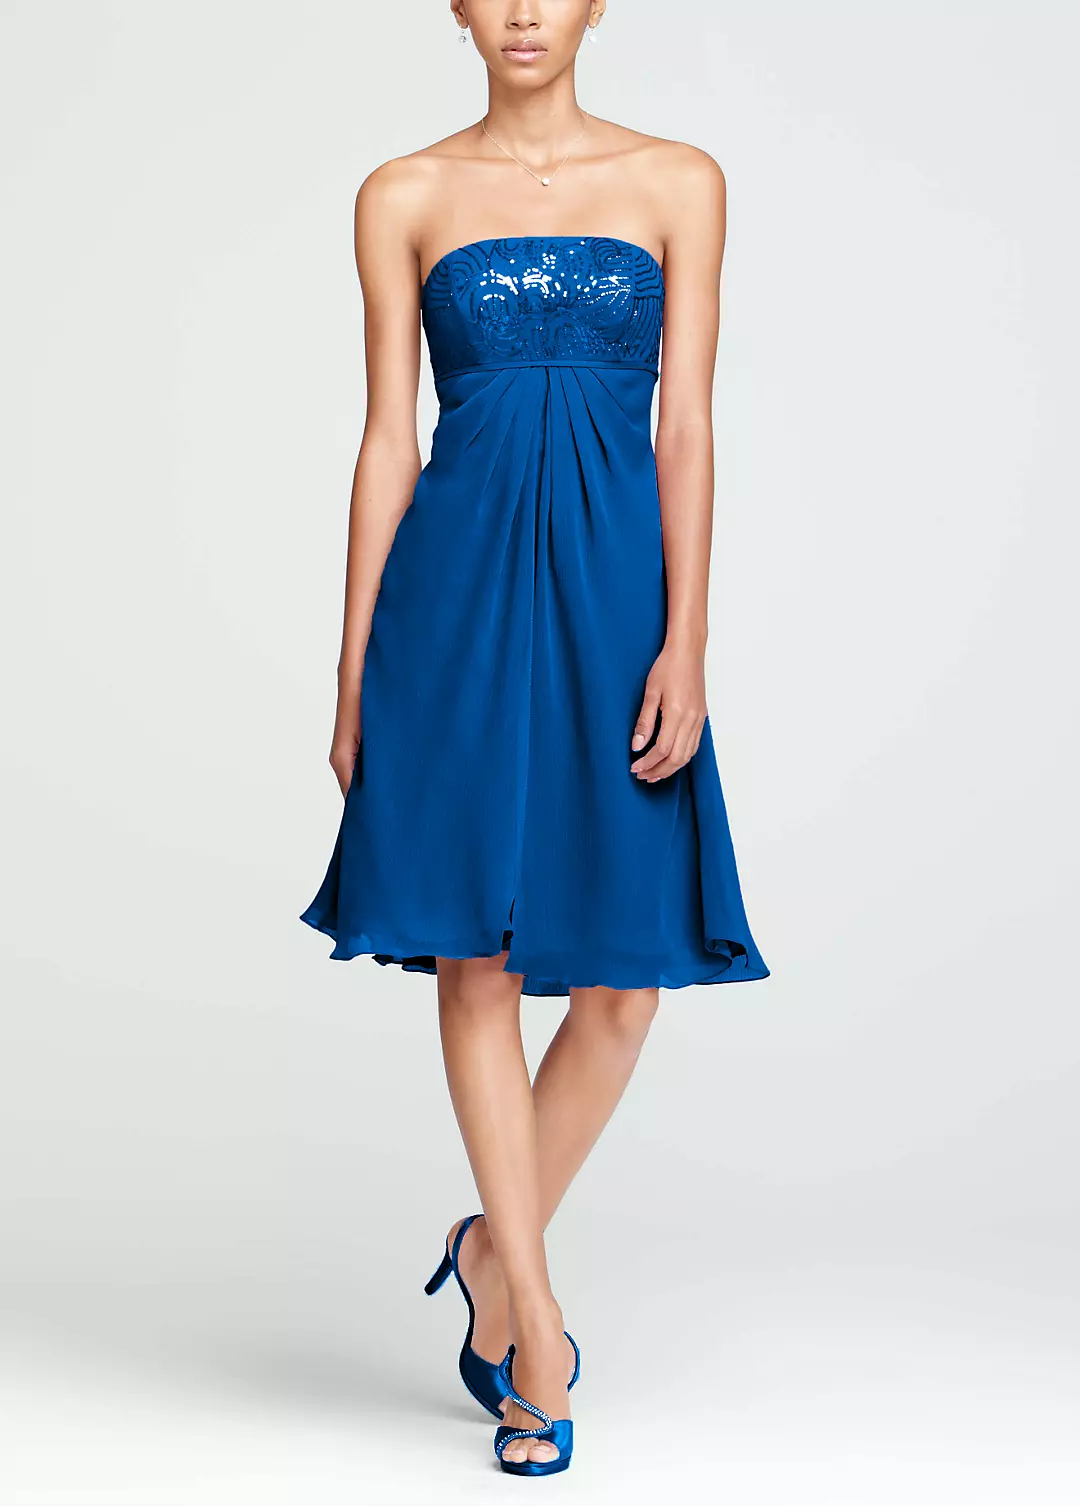 Short Strapless Dress with Sequin Bodice Image